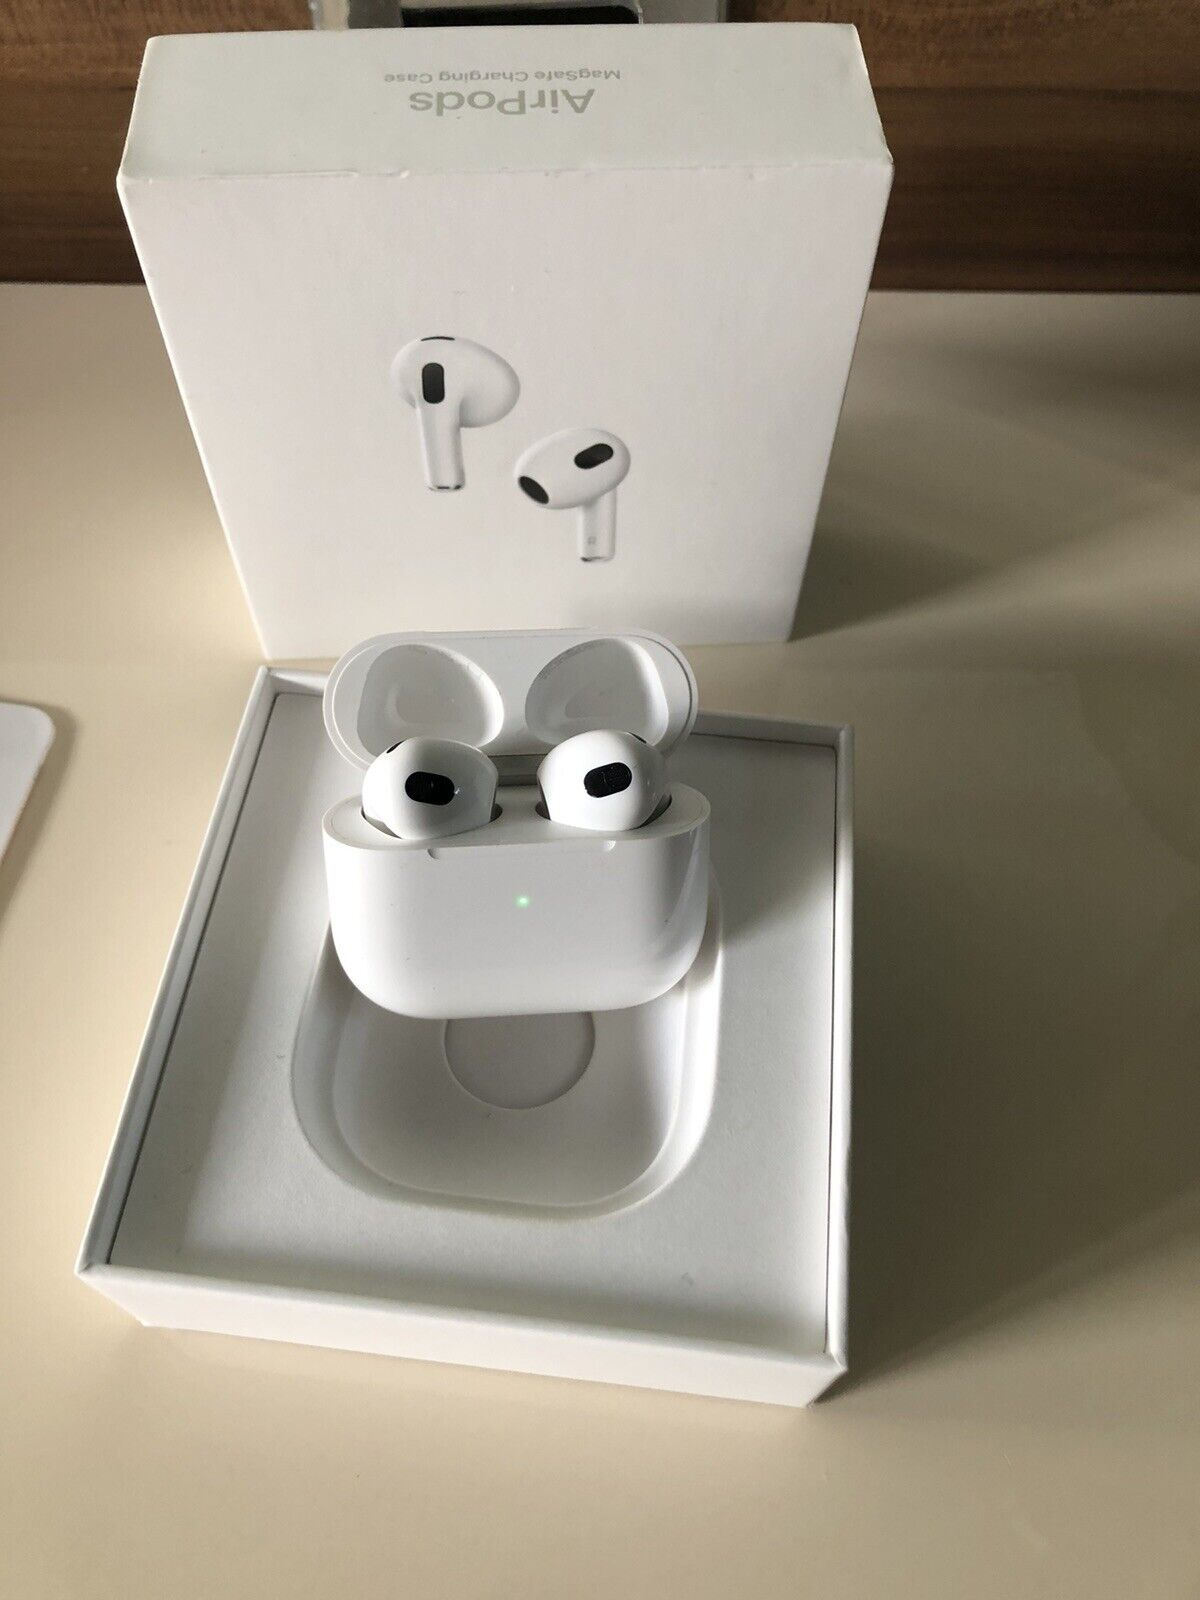 Apple Airpods 3rd Generation with MagSafe Charging Case - Airpods 3nd White